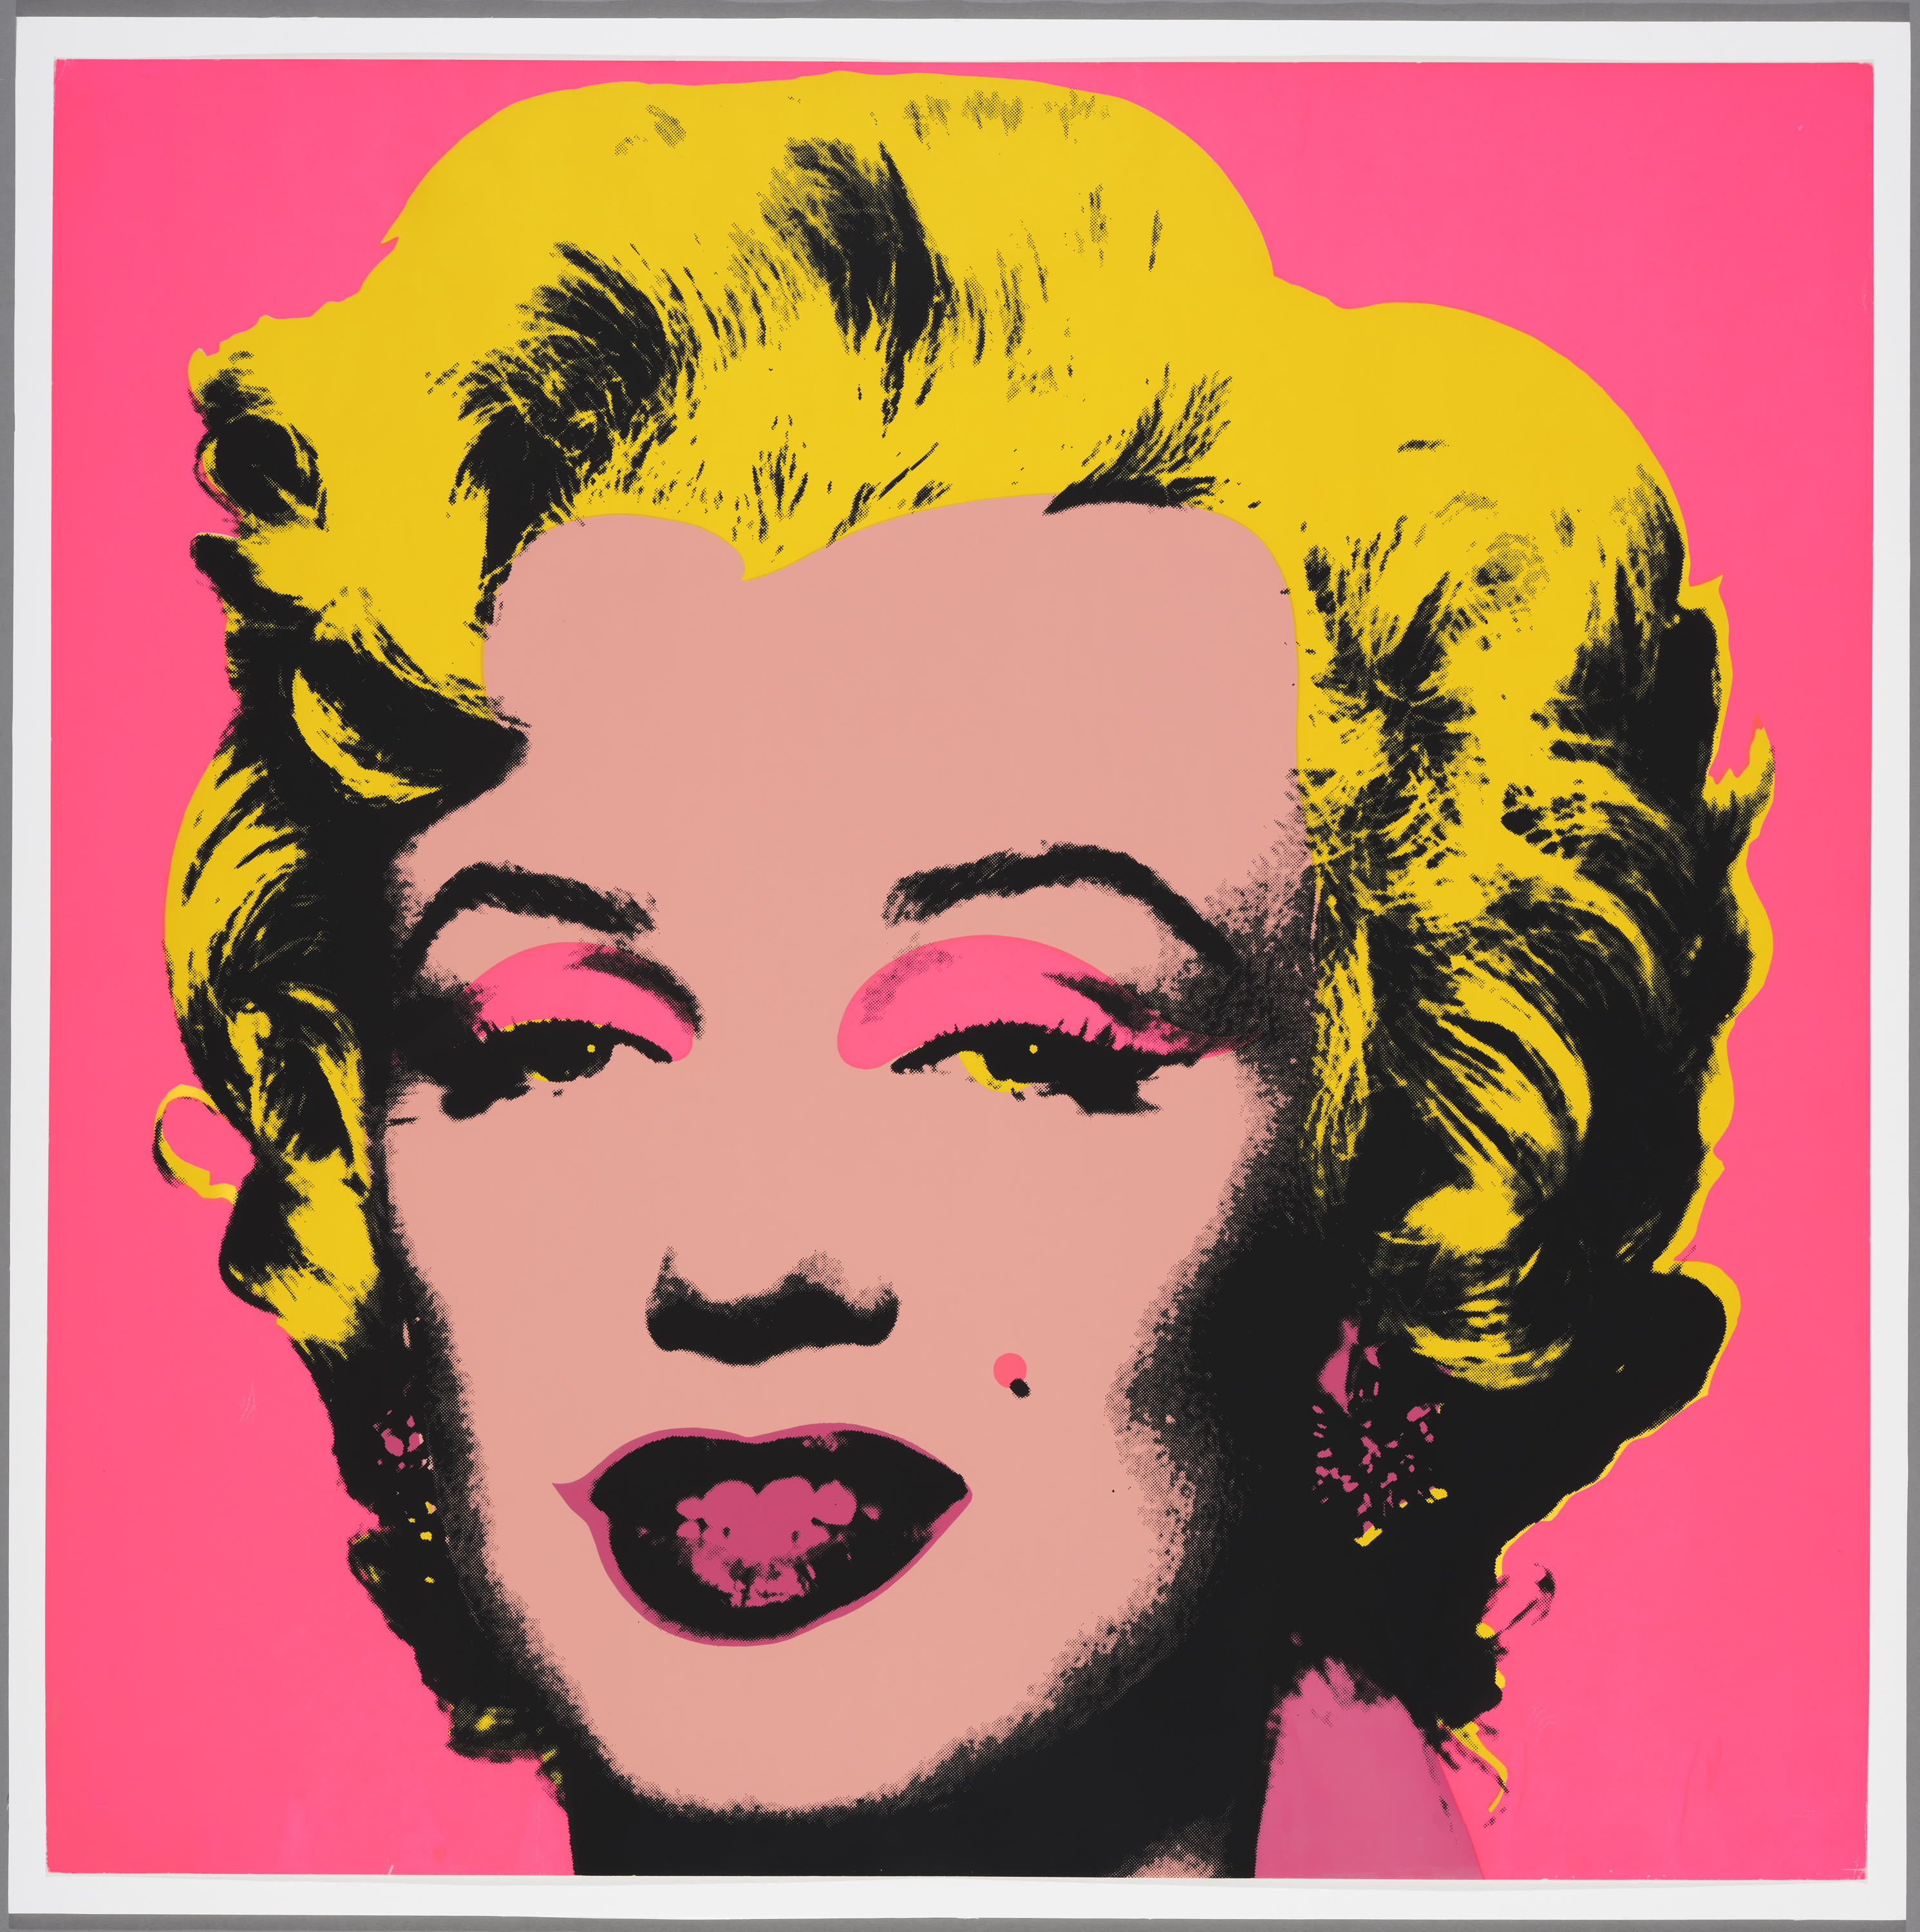 Largest ever Andy Warhol exhibition